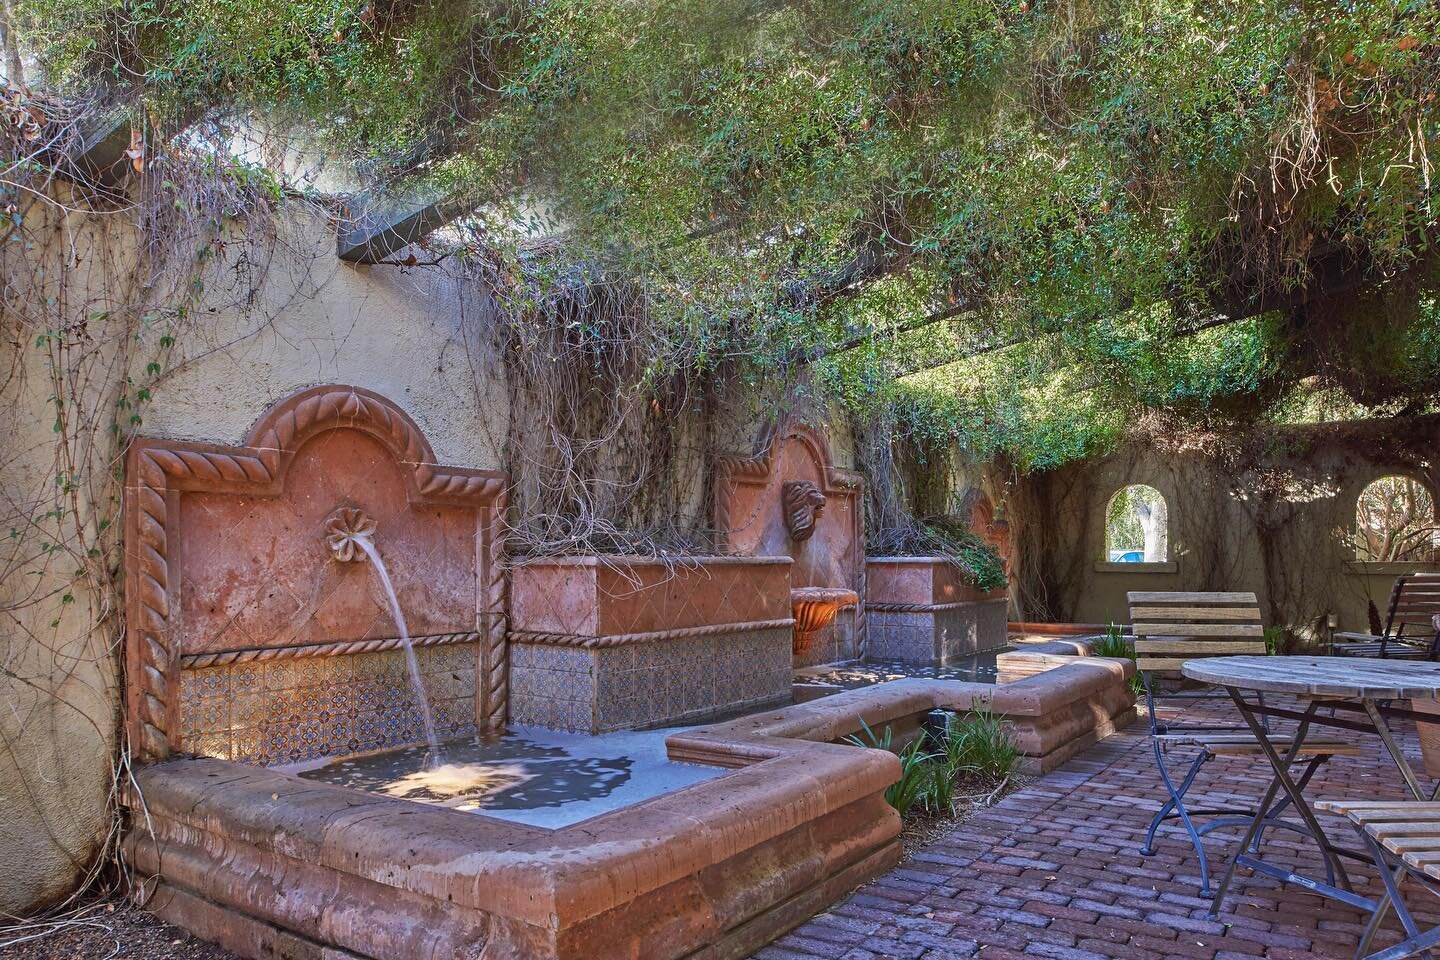 A rare glimpse into a serene quartyard masterpiece designed to ease a great mind. This space was once owned and enjoyed by Howard Hughes and today is a beautiful reminder that quality never goes out of style. It&rsquo;s always an honor to photograph 